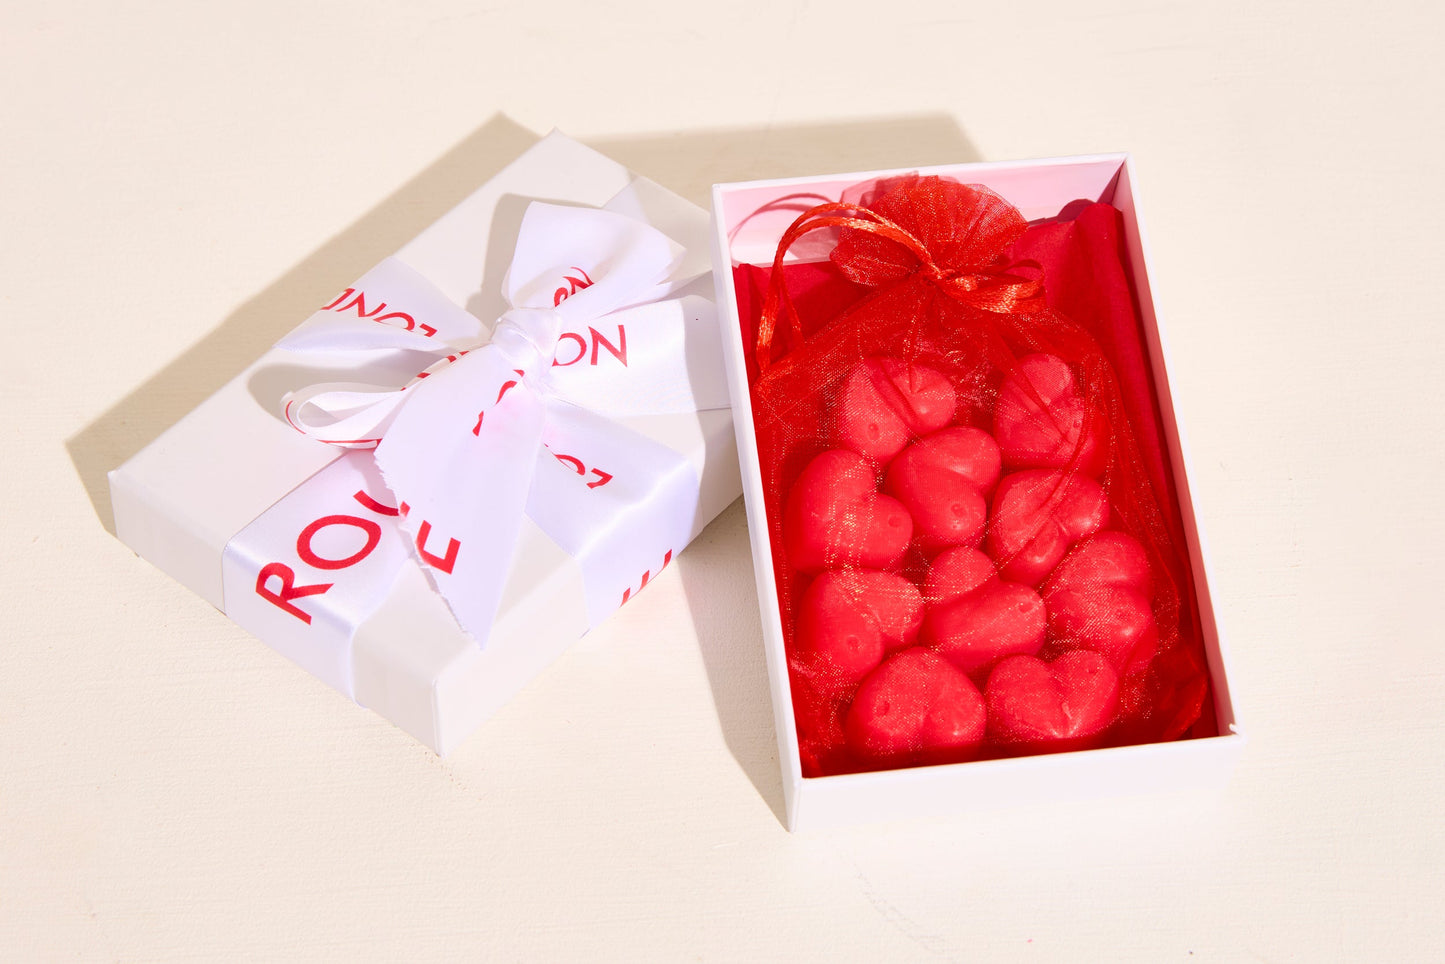 Hug - Orange Blossom Luxury Scented Wax Melts - By Rouge London